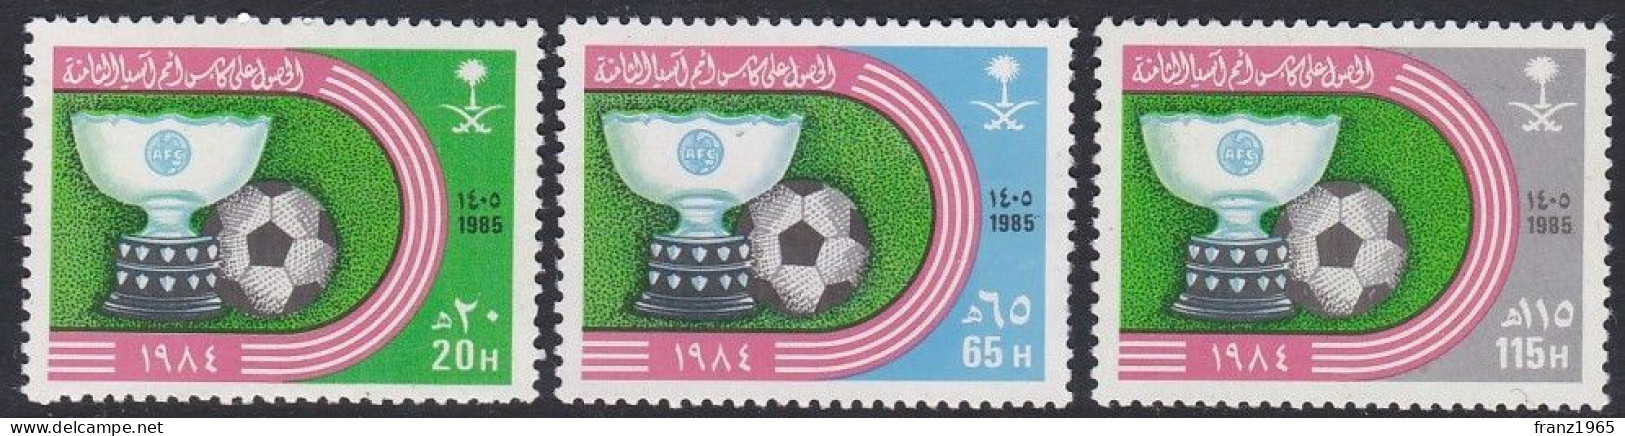 Asian Football Champion - 1985 - AFC Asian Cup